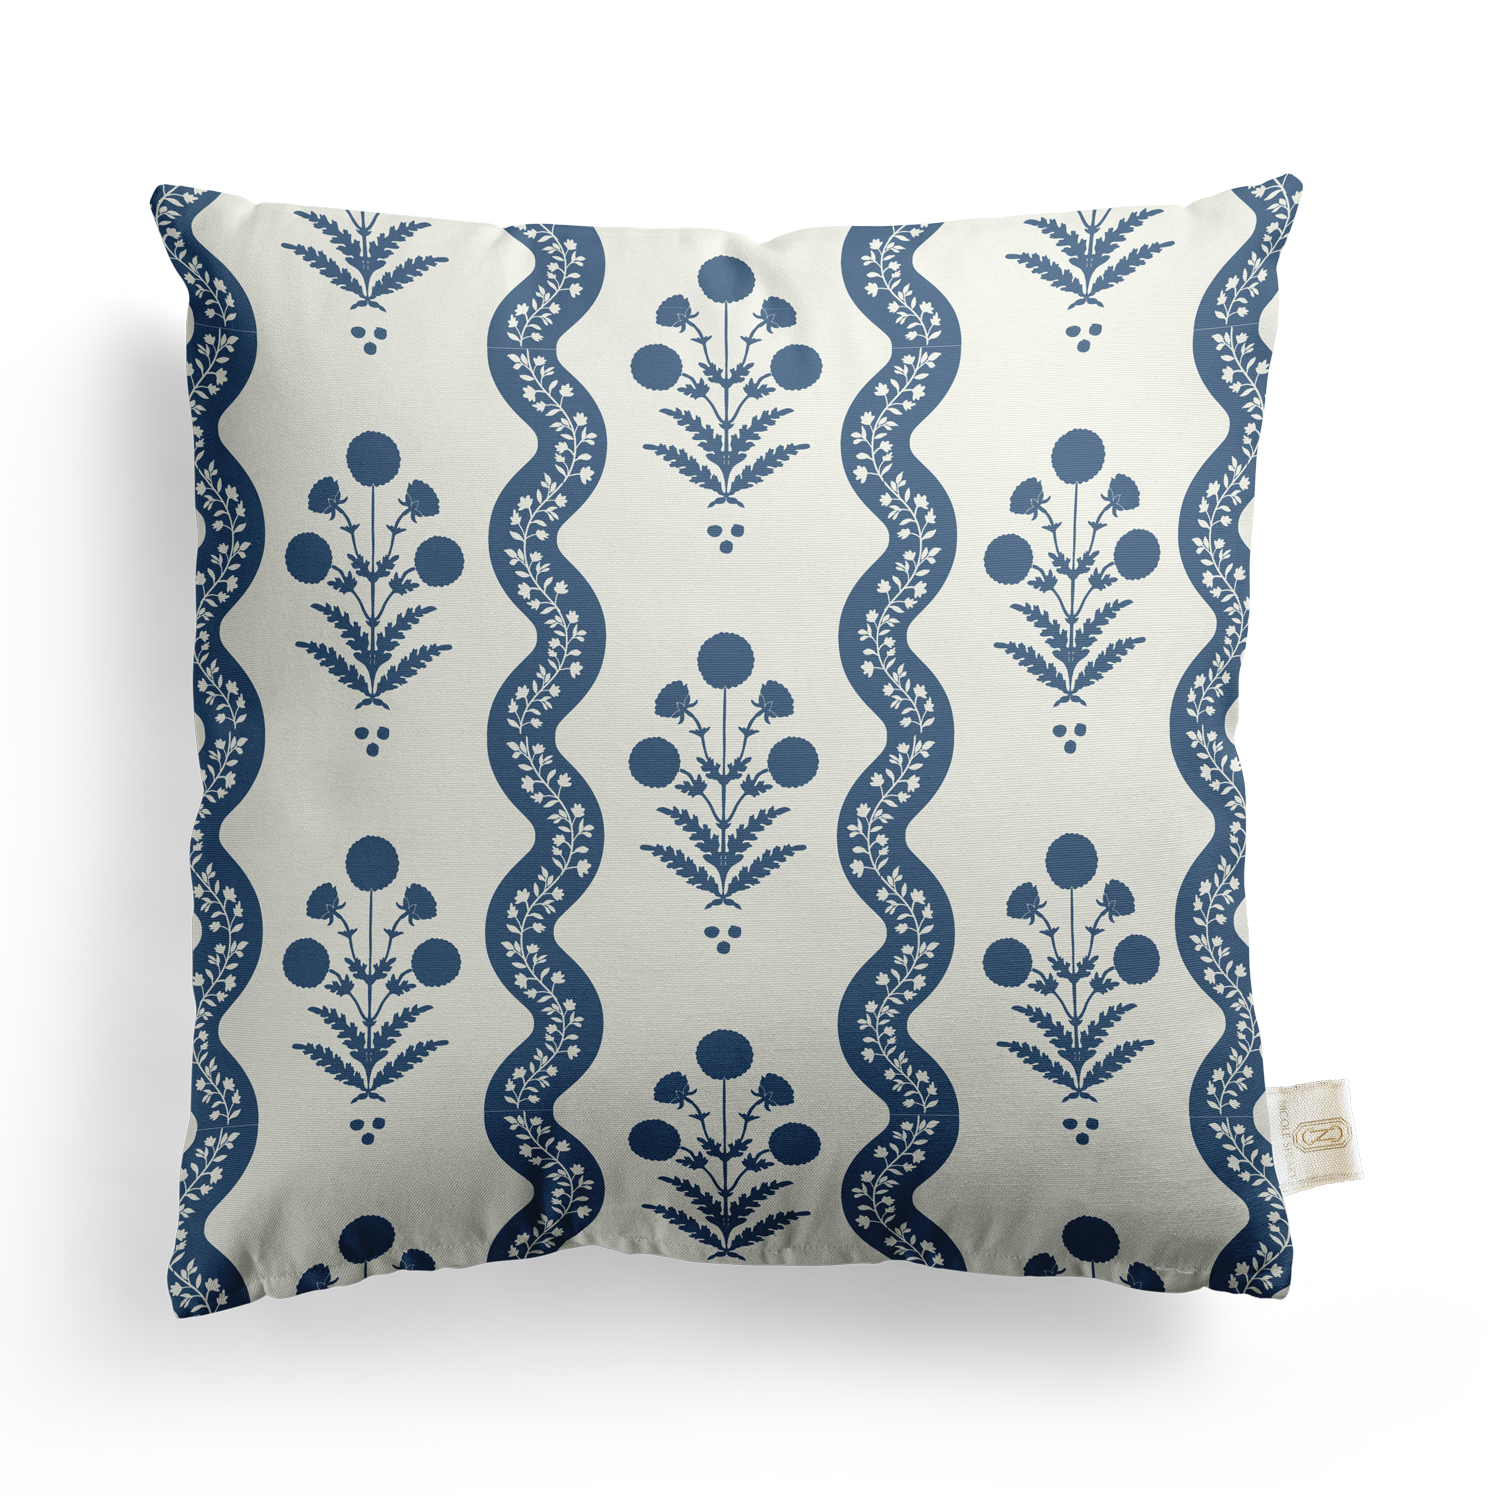 Blue and White Block Floral Print Decorative Pillow Cover – ONE AFFIRMATION